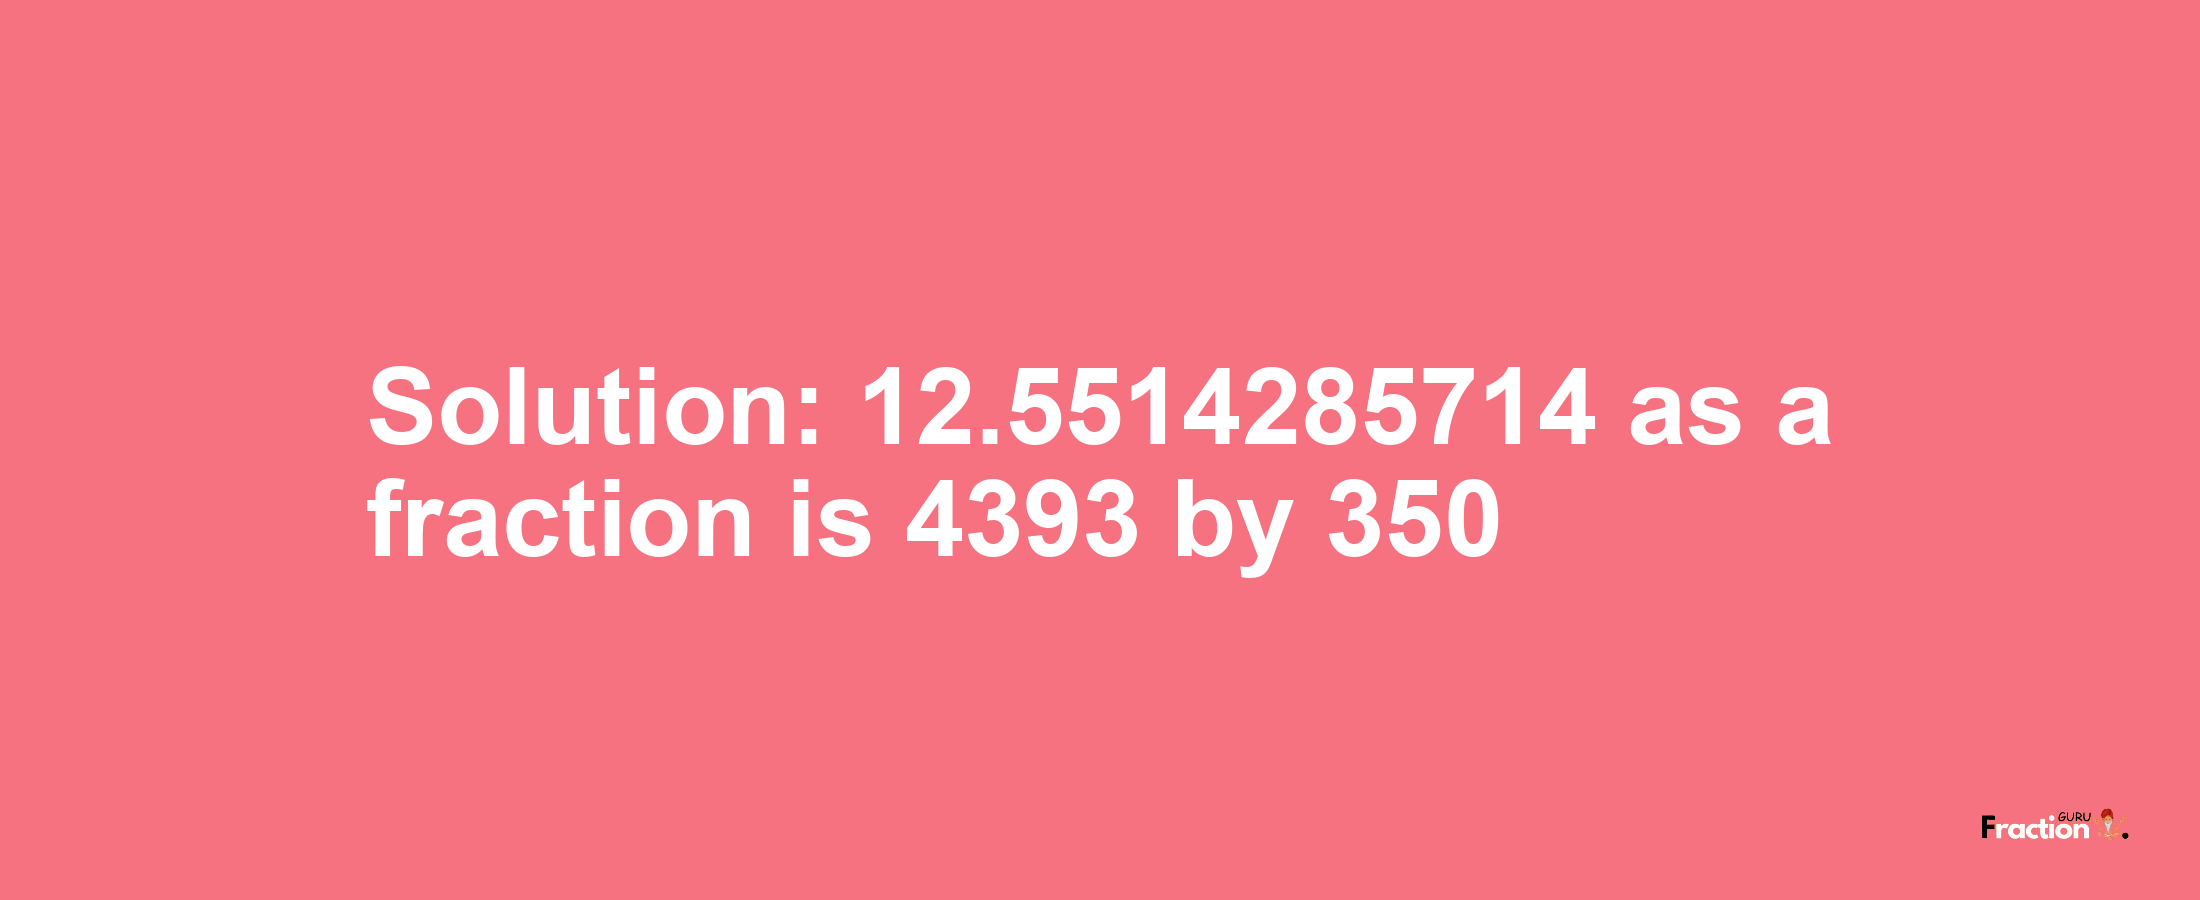 Solution:12.5514285714 as a fraction is 4393/350